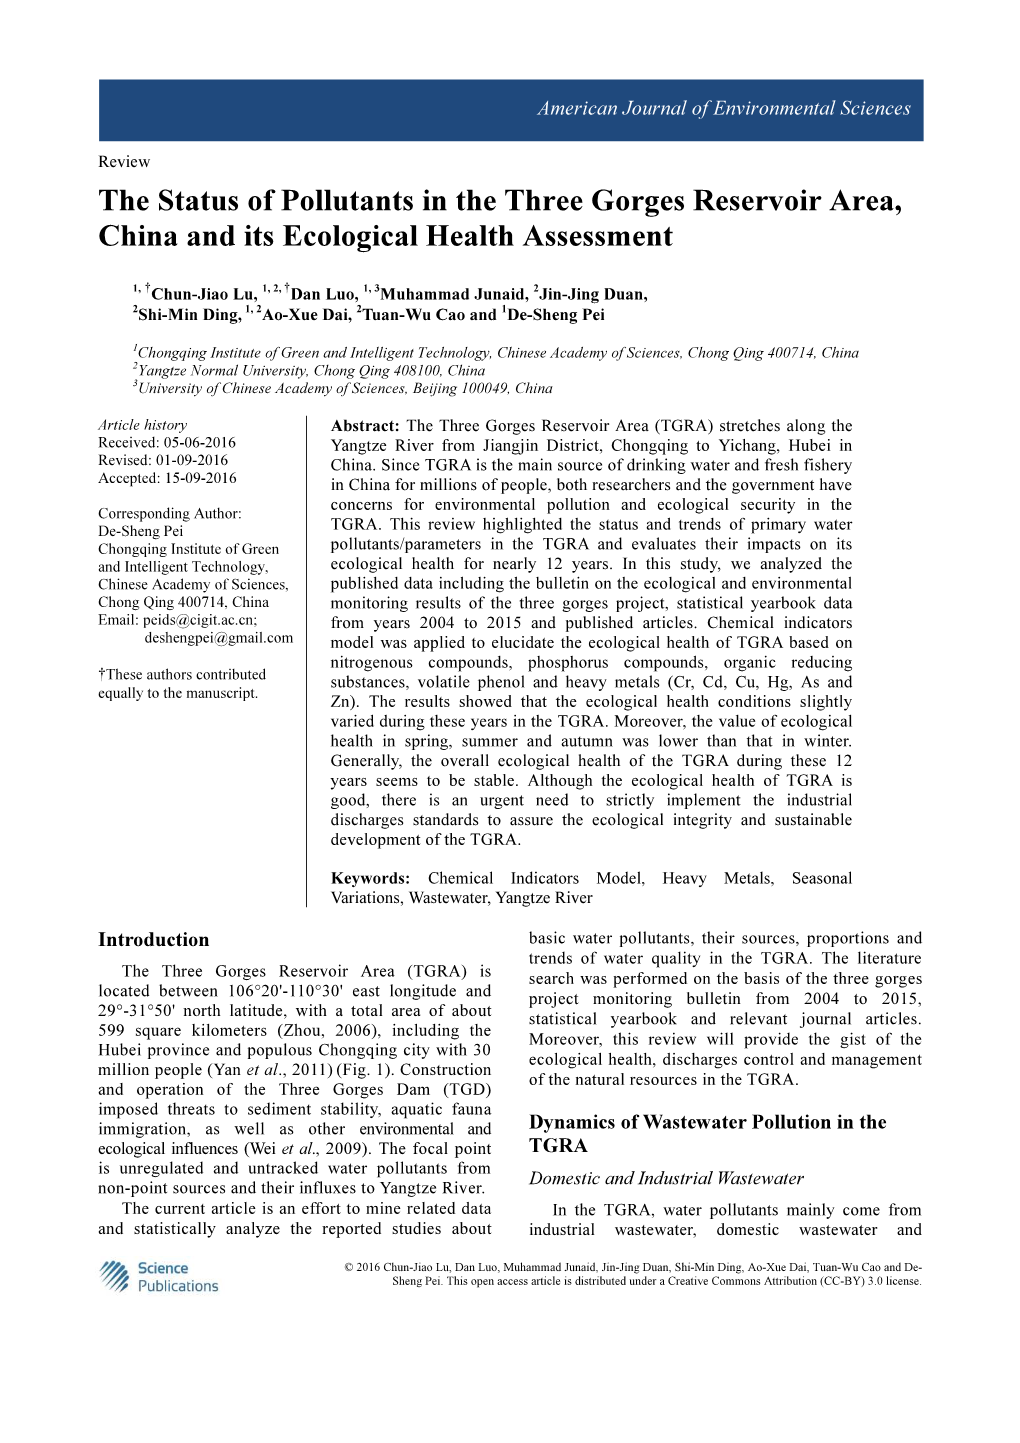 The Status of Pollutants in the Three Gorges Reservoir Area, China and Its Ecological Health Assessment